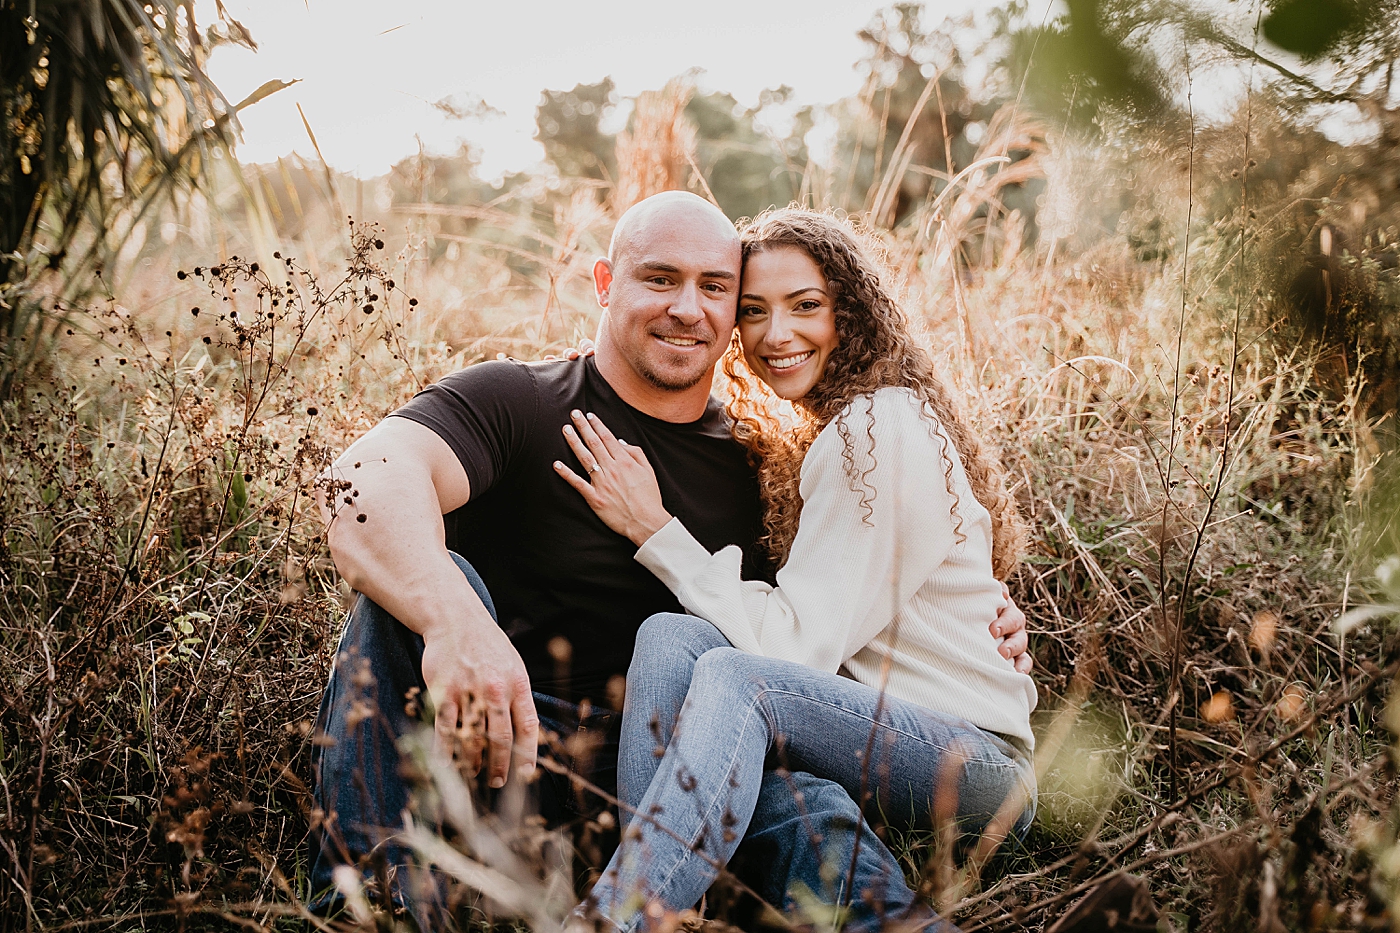 Couple sitting and holding each other on a tall grass field Romantic Riverbend Park Engagement Photography captured by South Florida Photographer Krystal Capone Photography